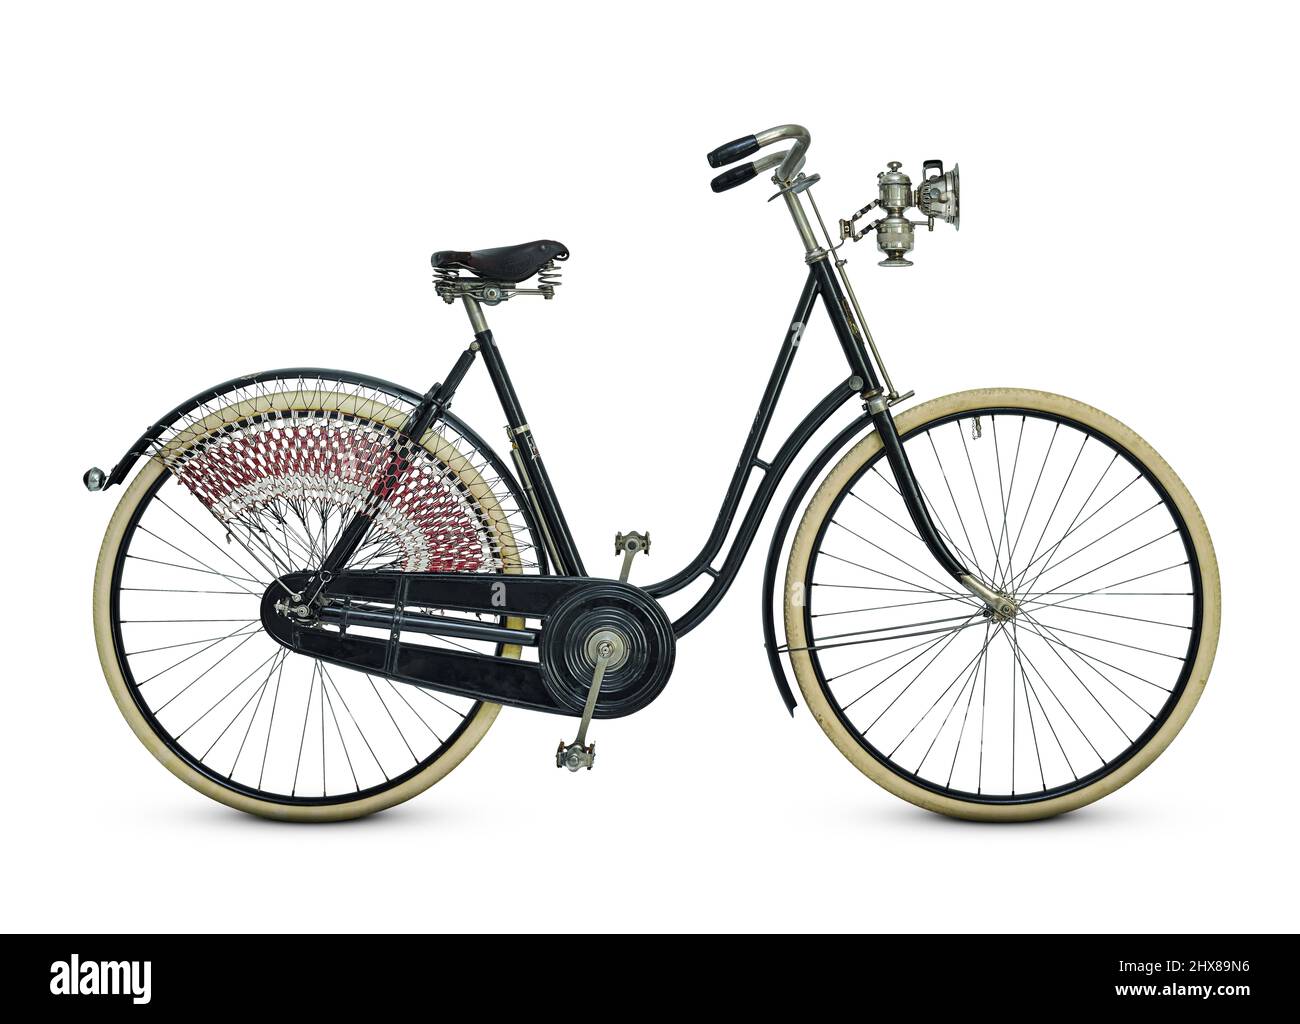 NSU Ladies Bike, 1915, Neckarsulm, Germany, side view, drive side  Number of gears: 0  Steel frame Wheel size: 28' Special features: carbide stone added to water creates a gas which is like oil to power light in lamp Stock Photo